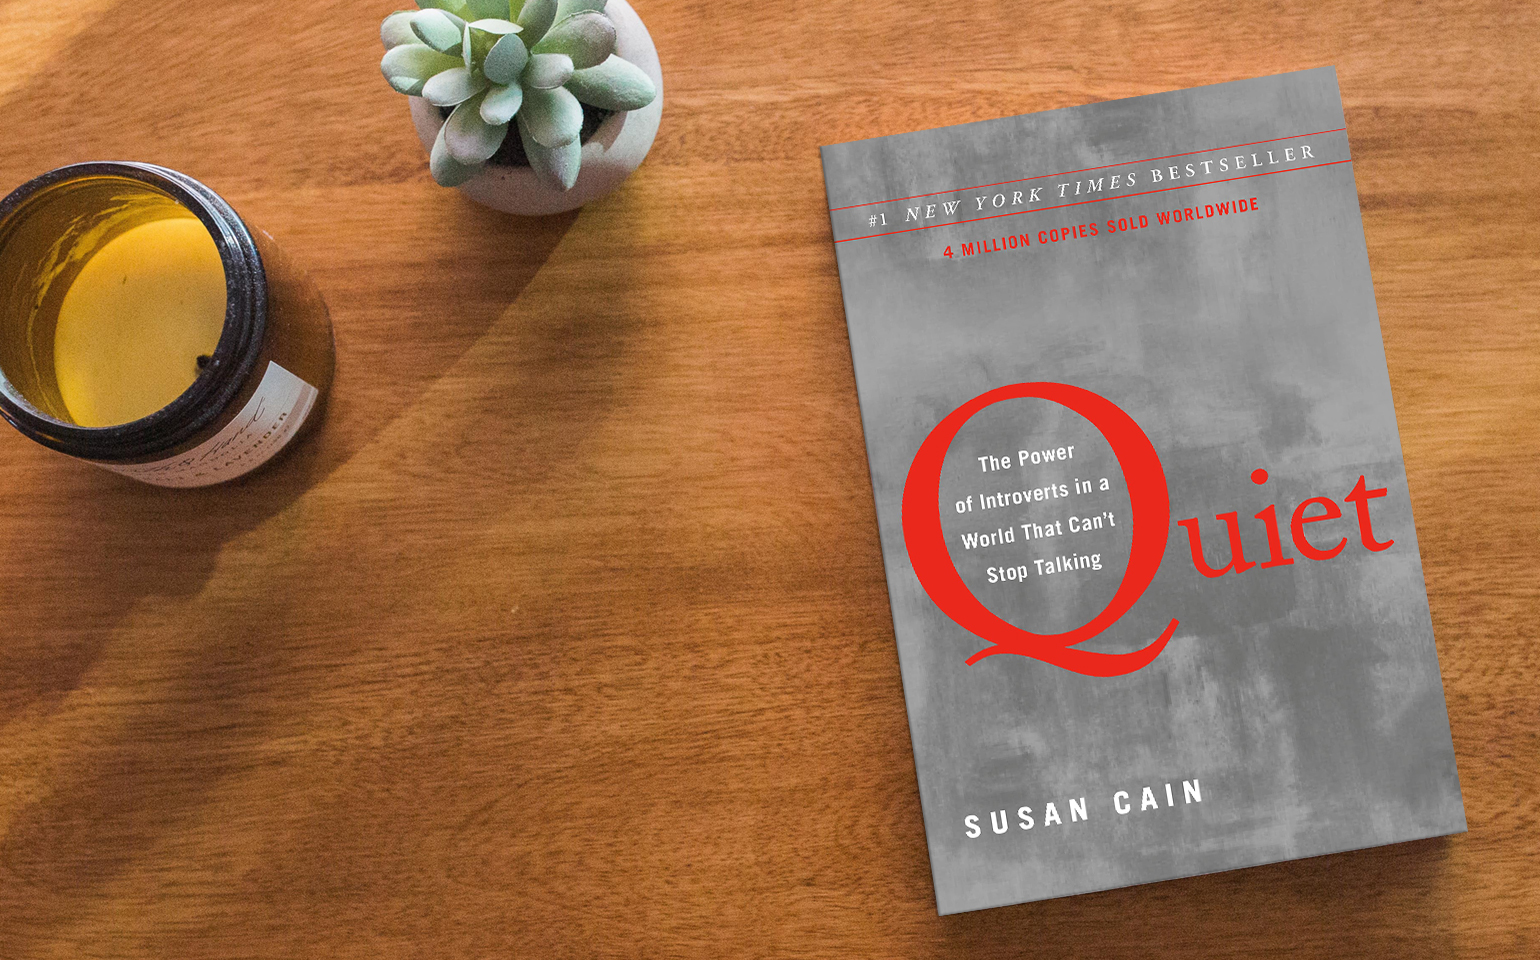 The cover of Susan Cain's Quiet is shown, which features a large "Q" against a cloudy and calm sky background.